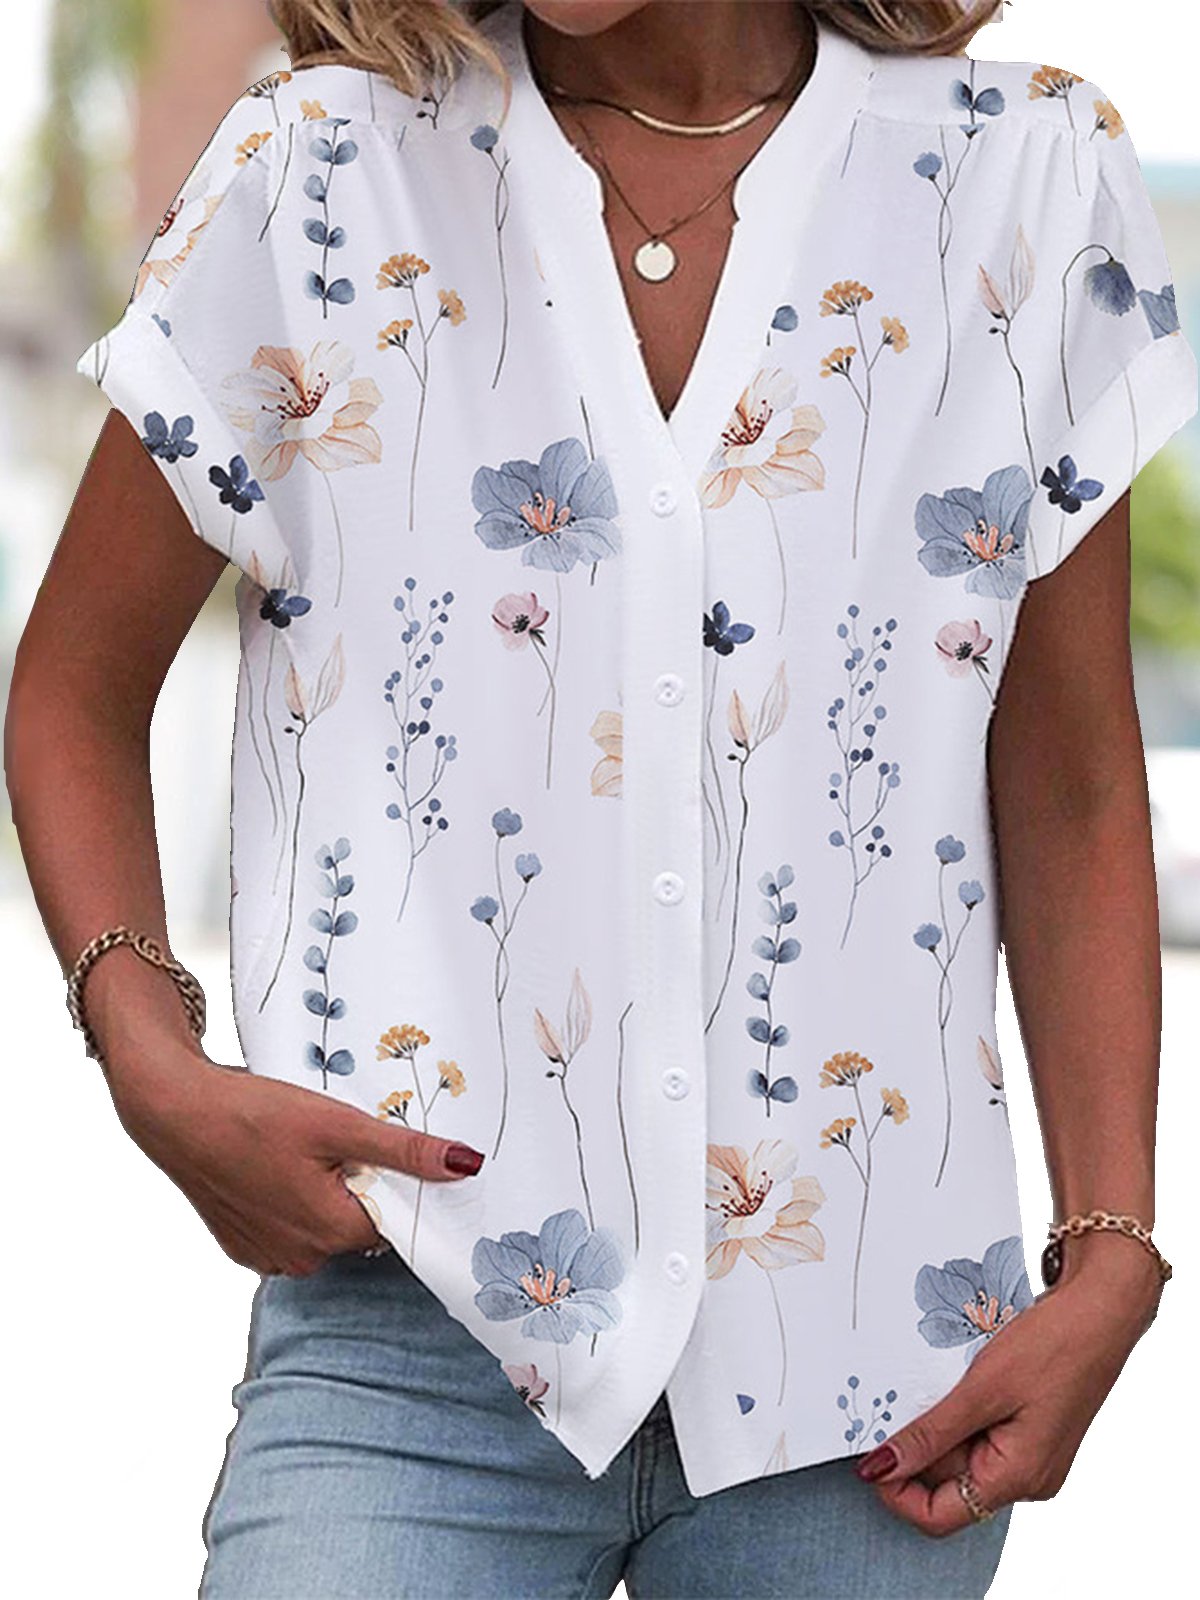  Women's V Neck T-Shirt Micro-Elasticity Buttoned Floral Loose Casual Blouse